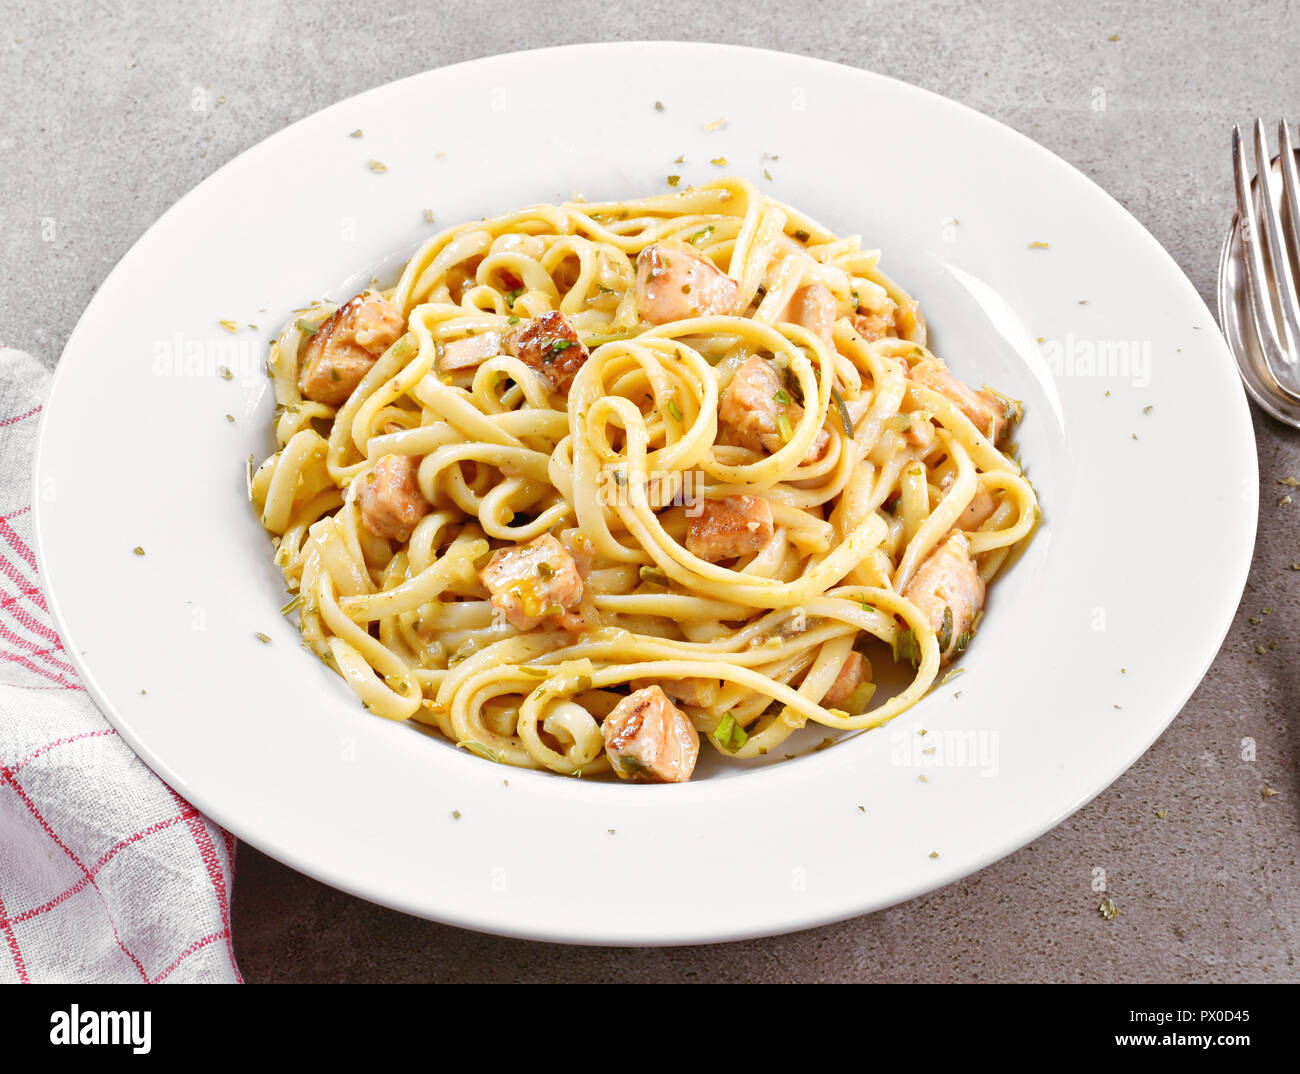 Delicious salmon pasta dish, tagliatelle or linguine noodles. High angle view of fresh spaghetti pasta with herbs and grilled salmon. Stock Photo